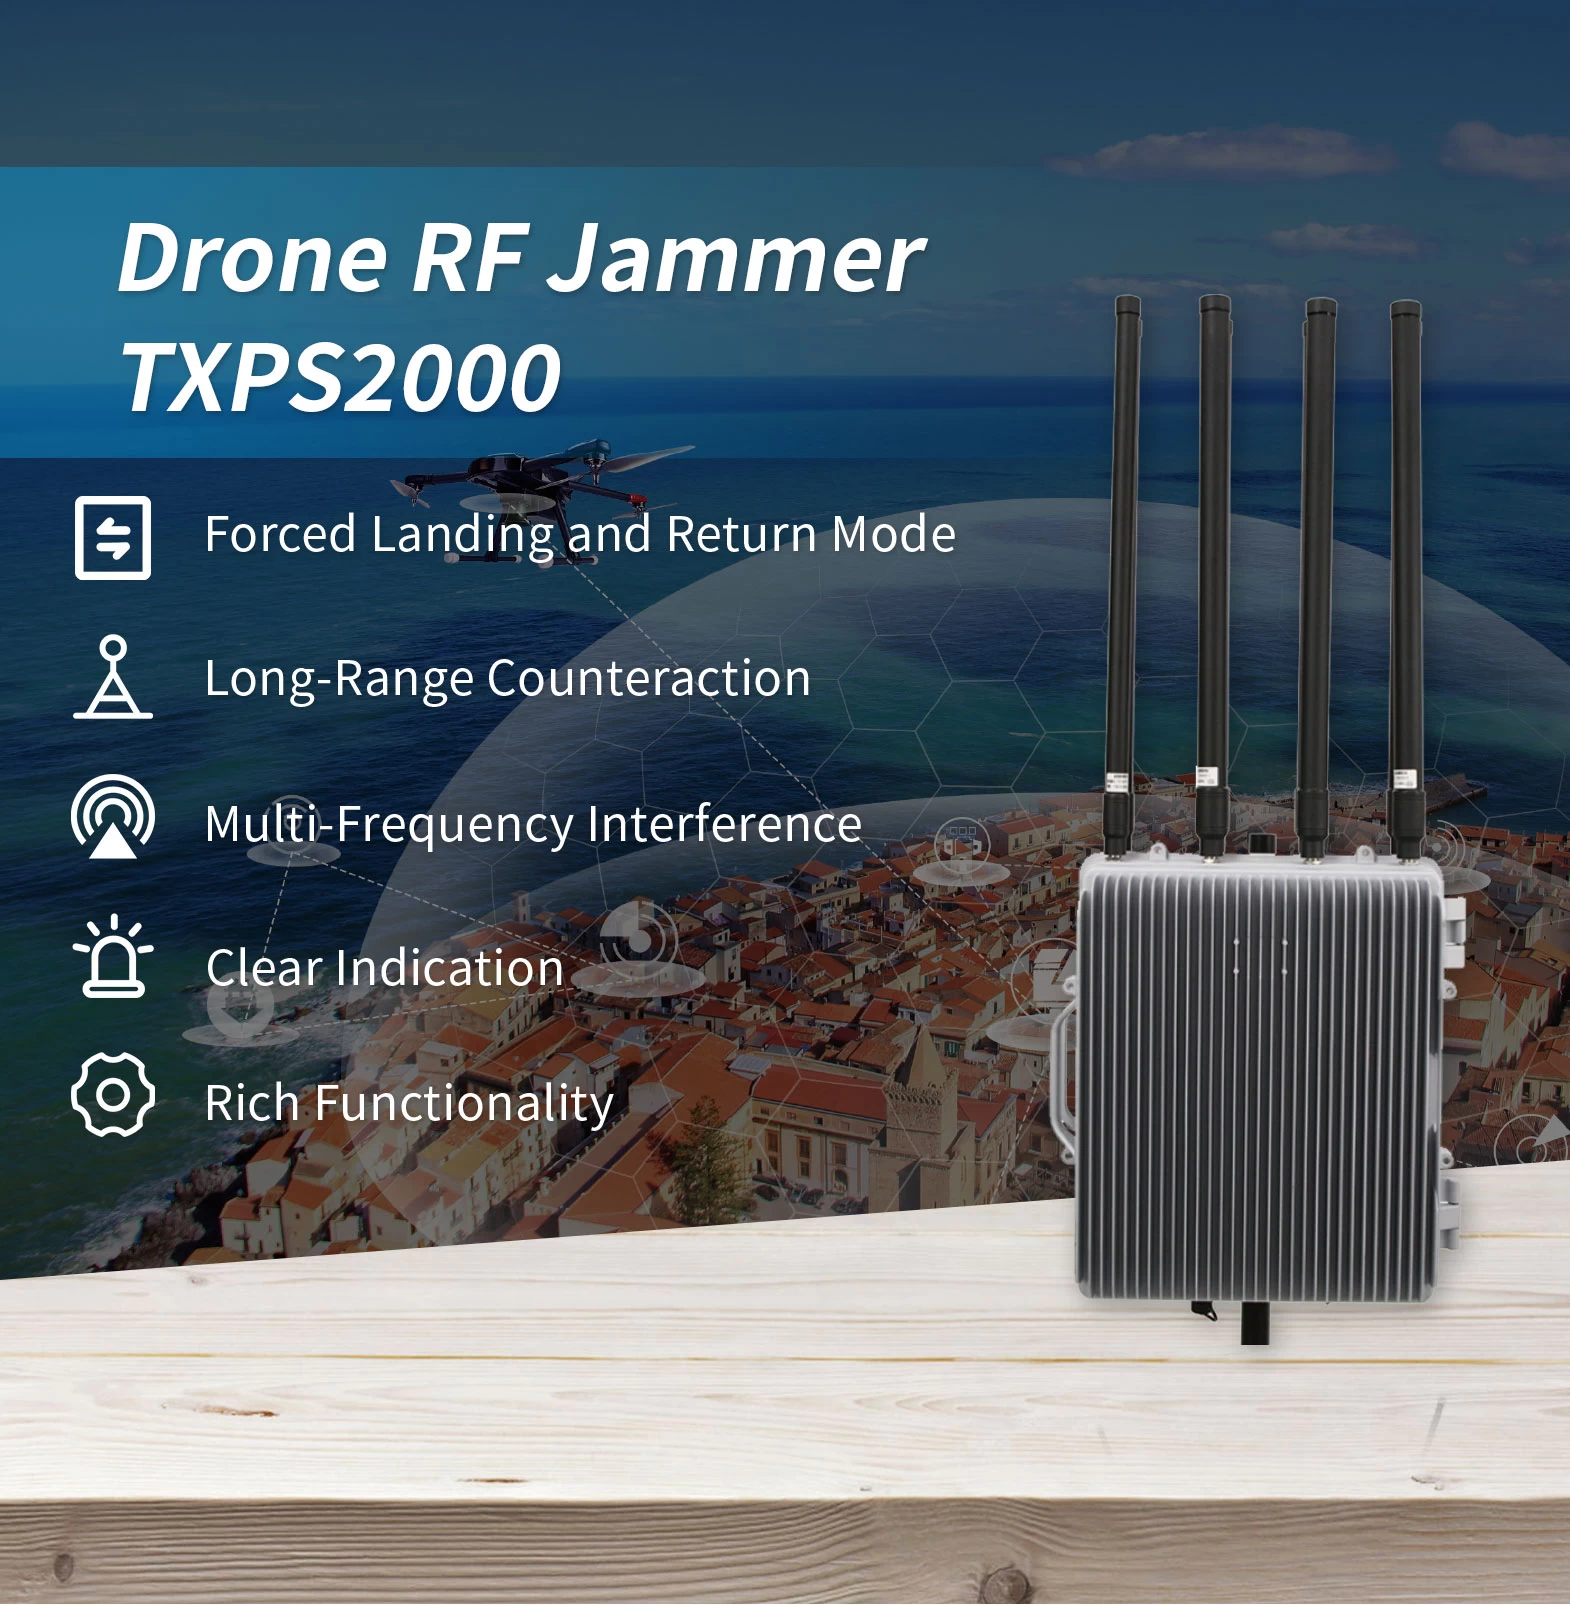 Drone RF Jammer TXPS2000 - Drone Defense - 1